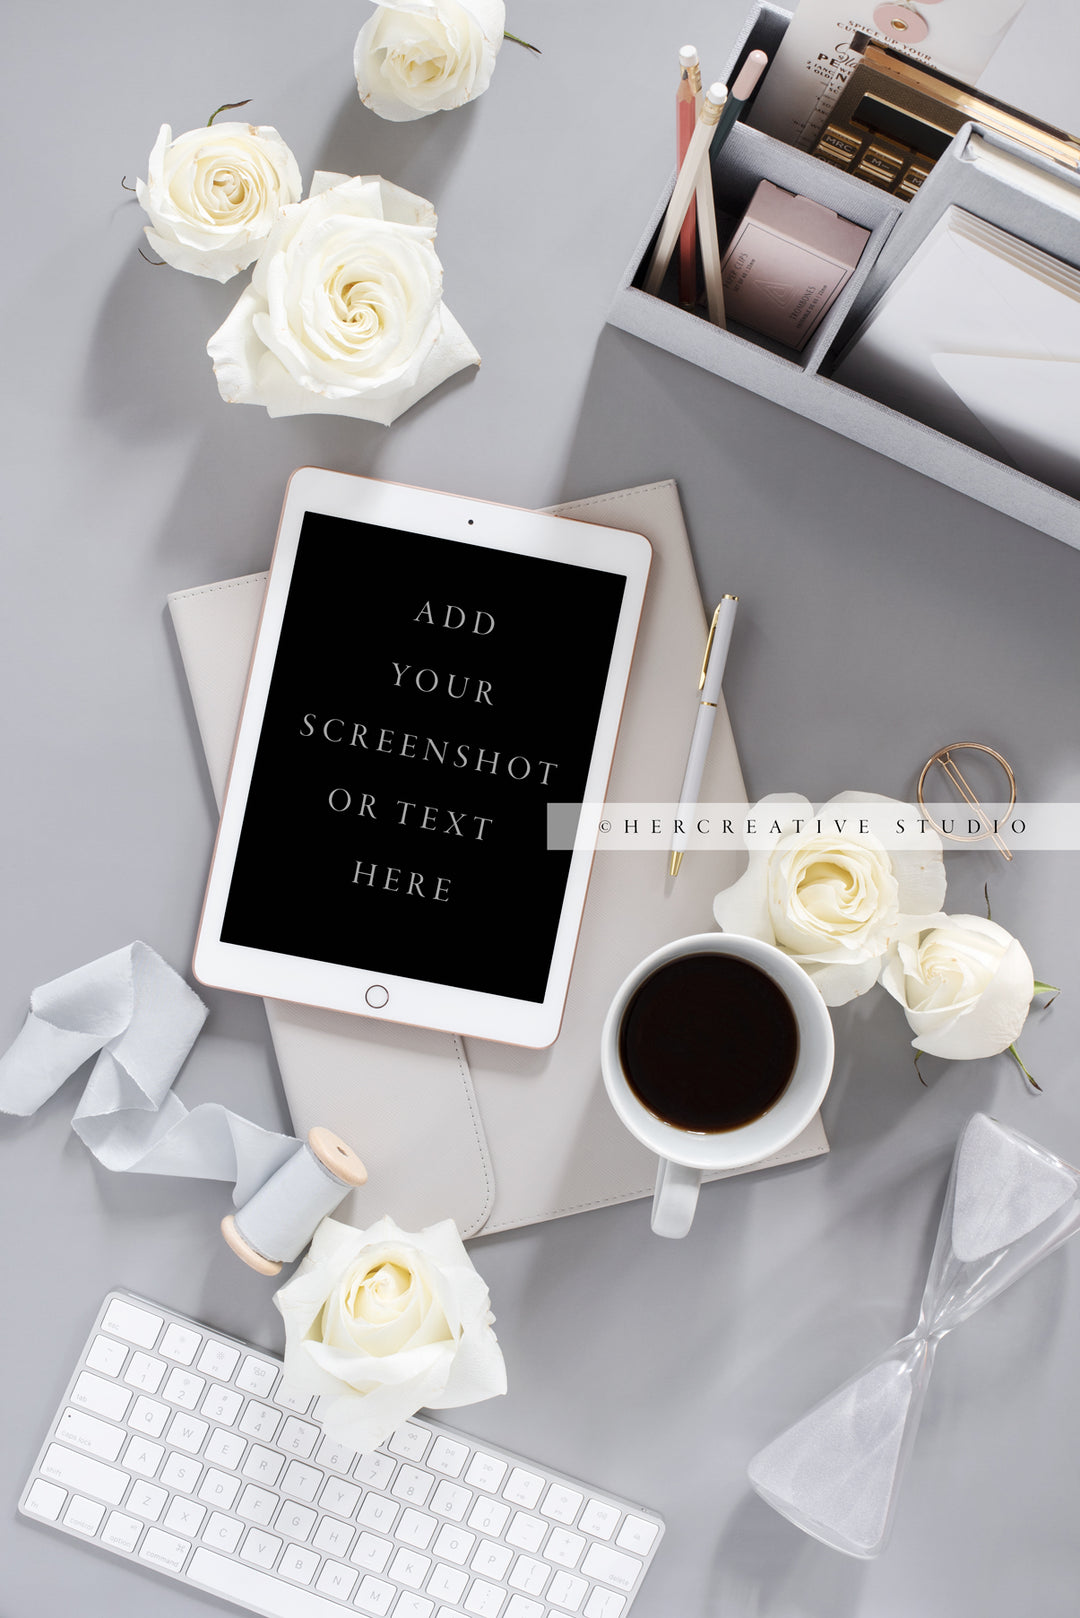 Tablet, Coffee and Roses on Grey Background. Stock Image